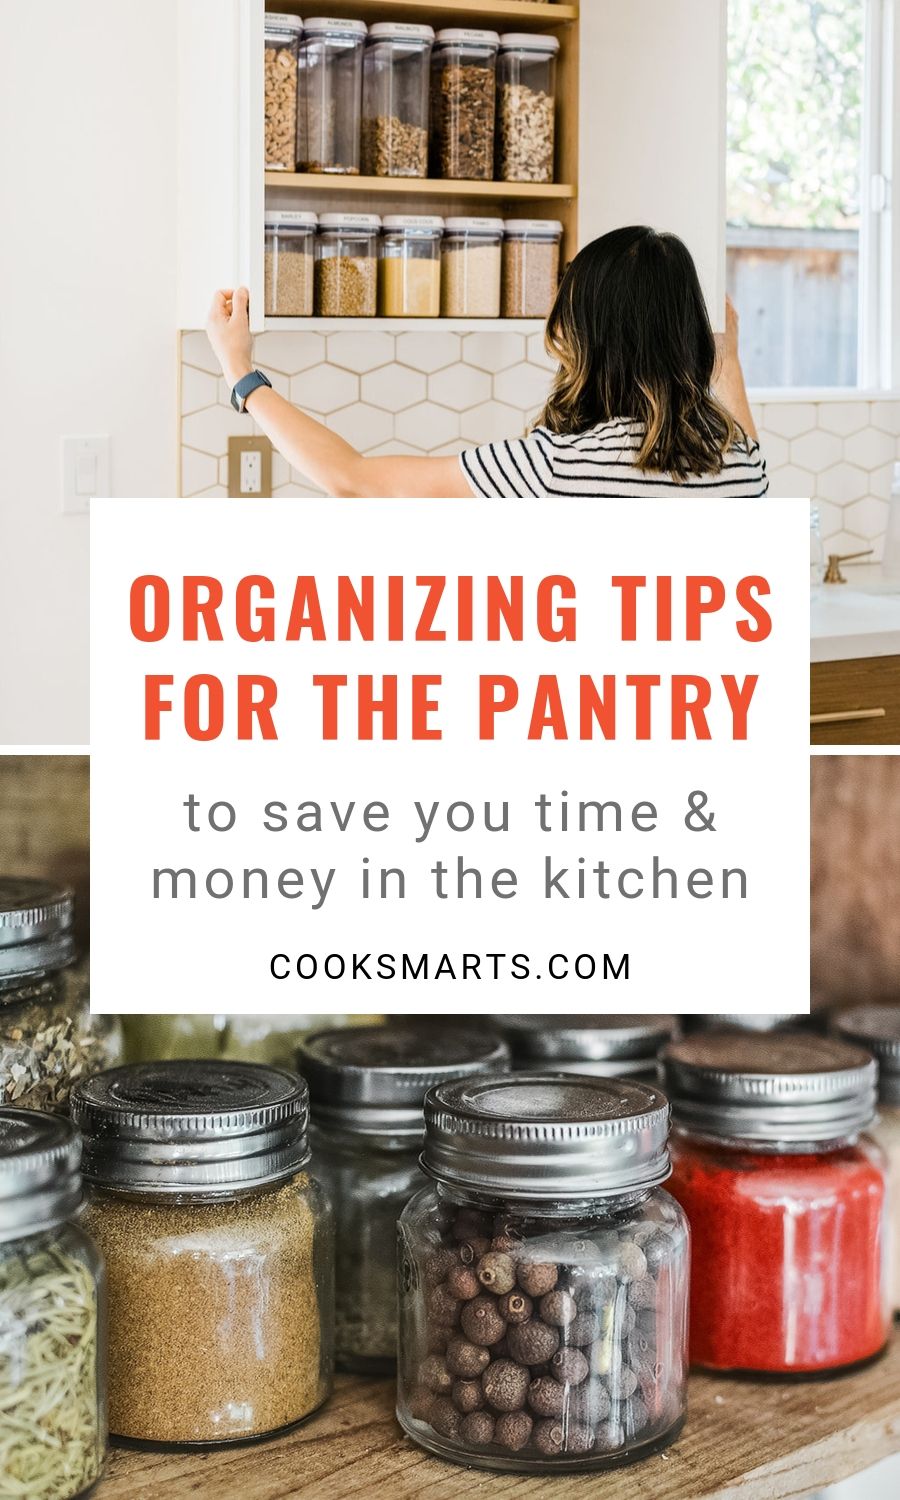 Kitchen Secrets for Pantry Organization | In the Kitchen with Cook Smarts Podcast